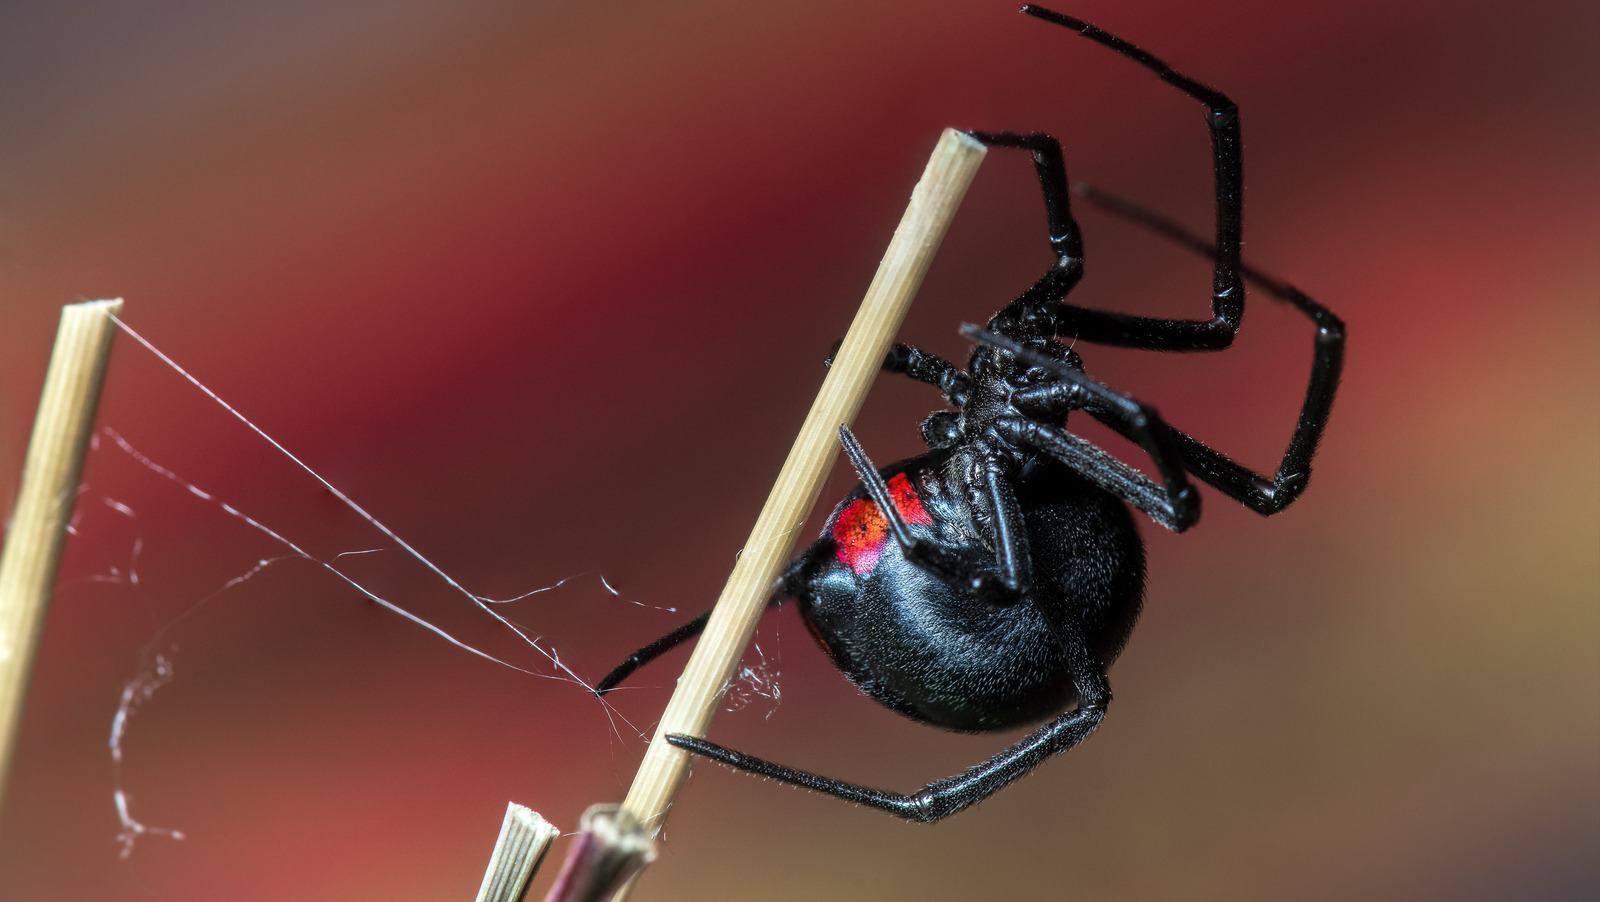 The Most Dangerous Spiders In The World